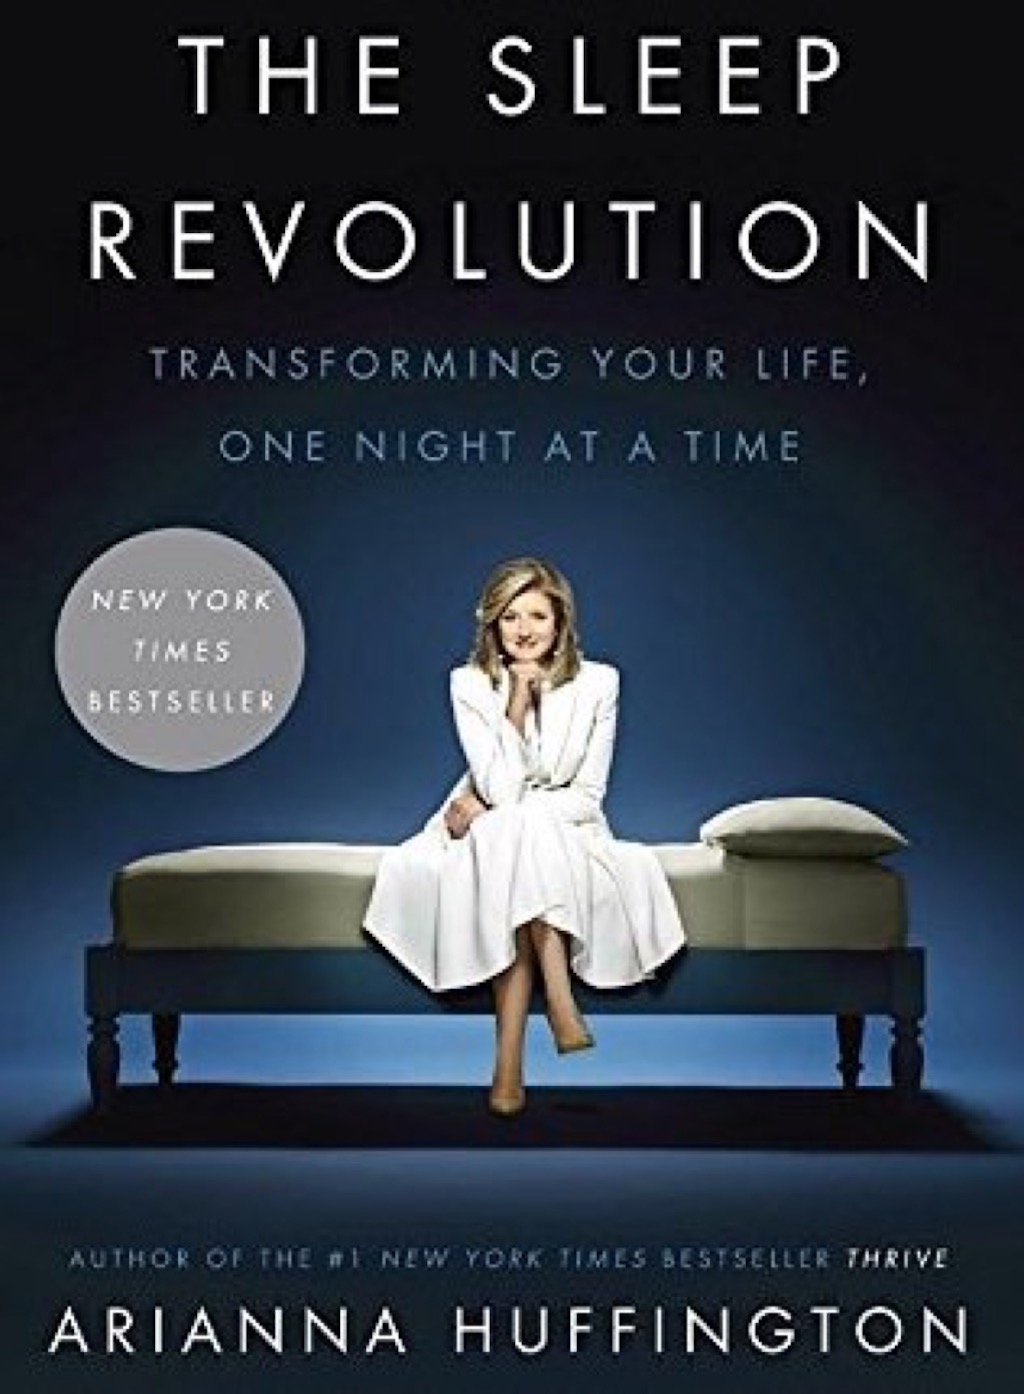 the sleep revolution books every woman should read in her 40s